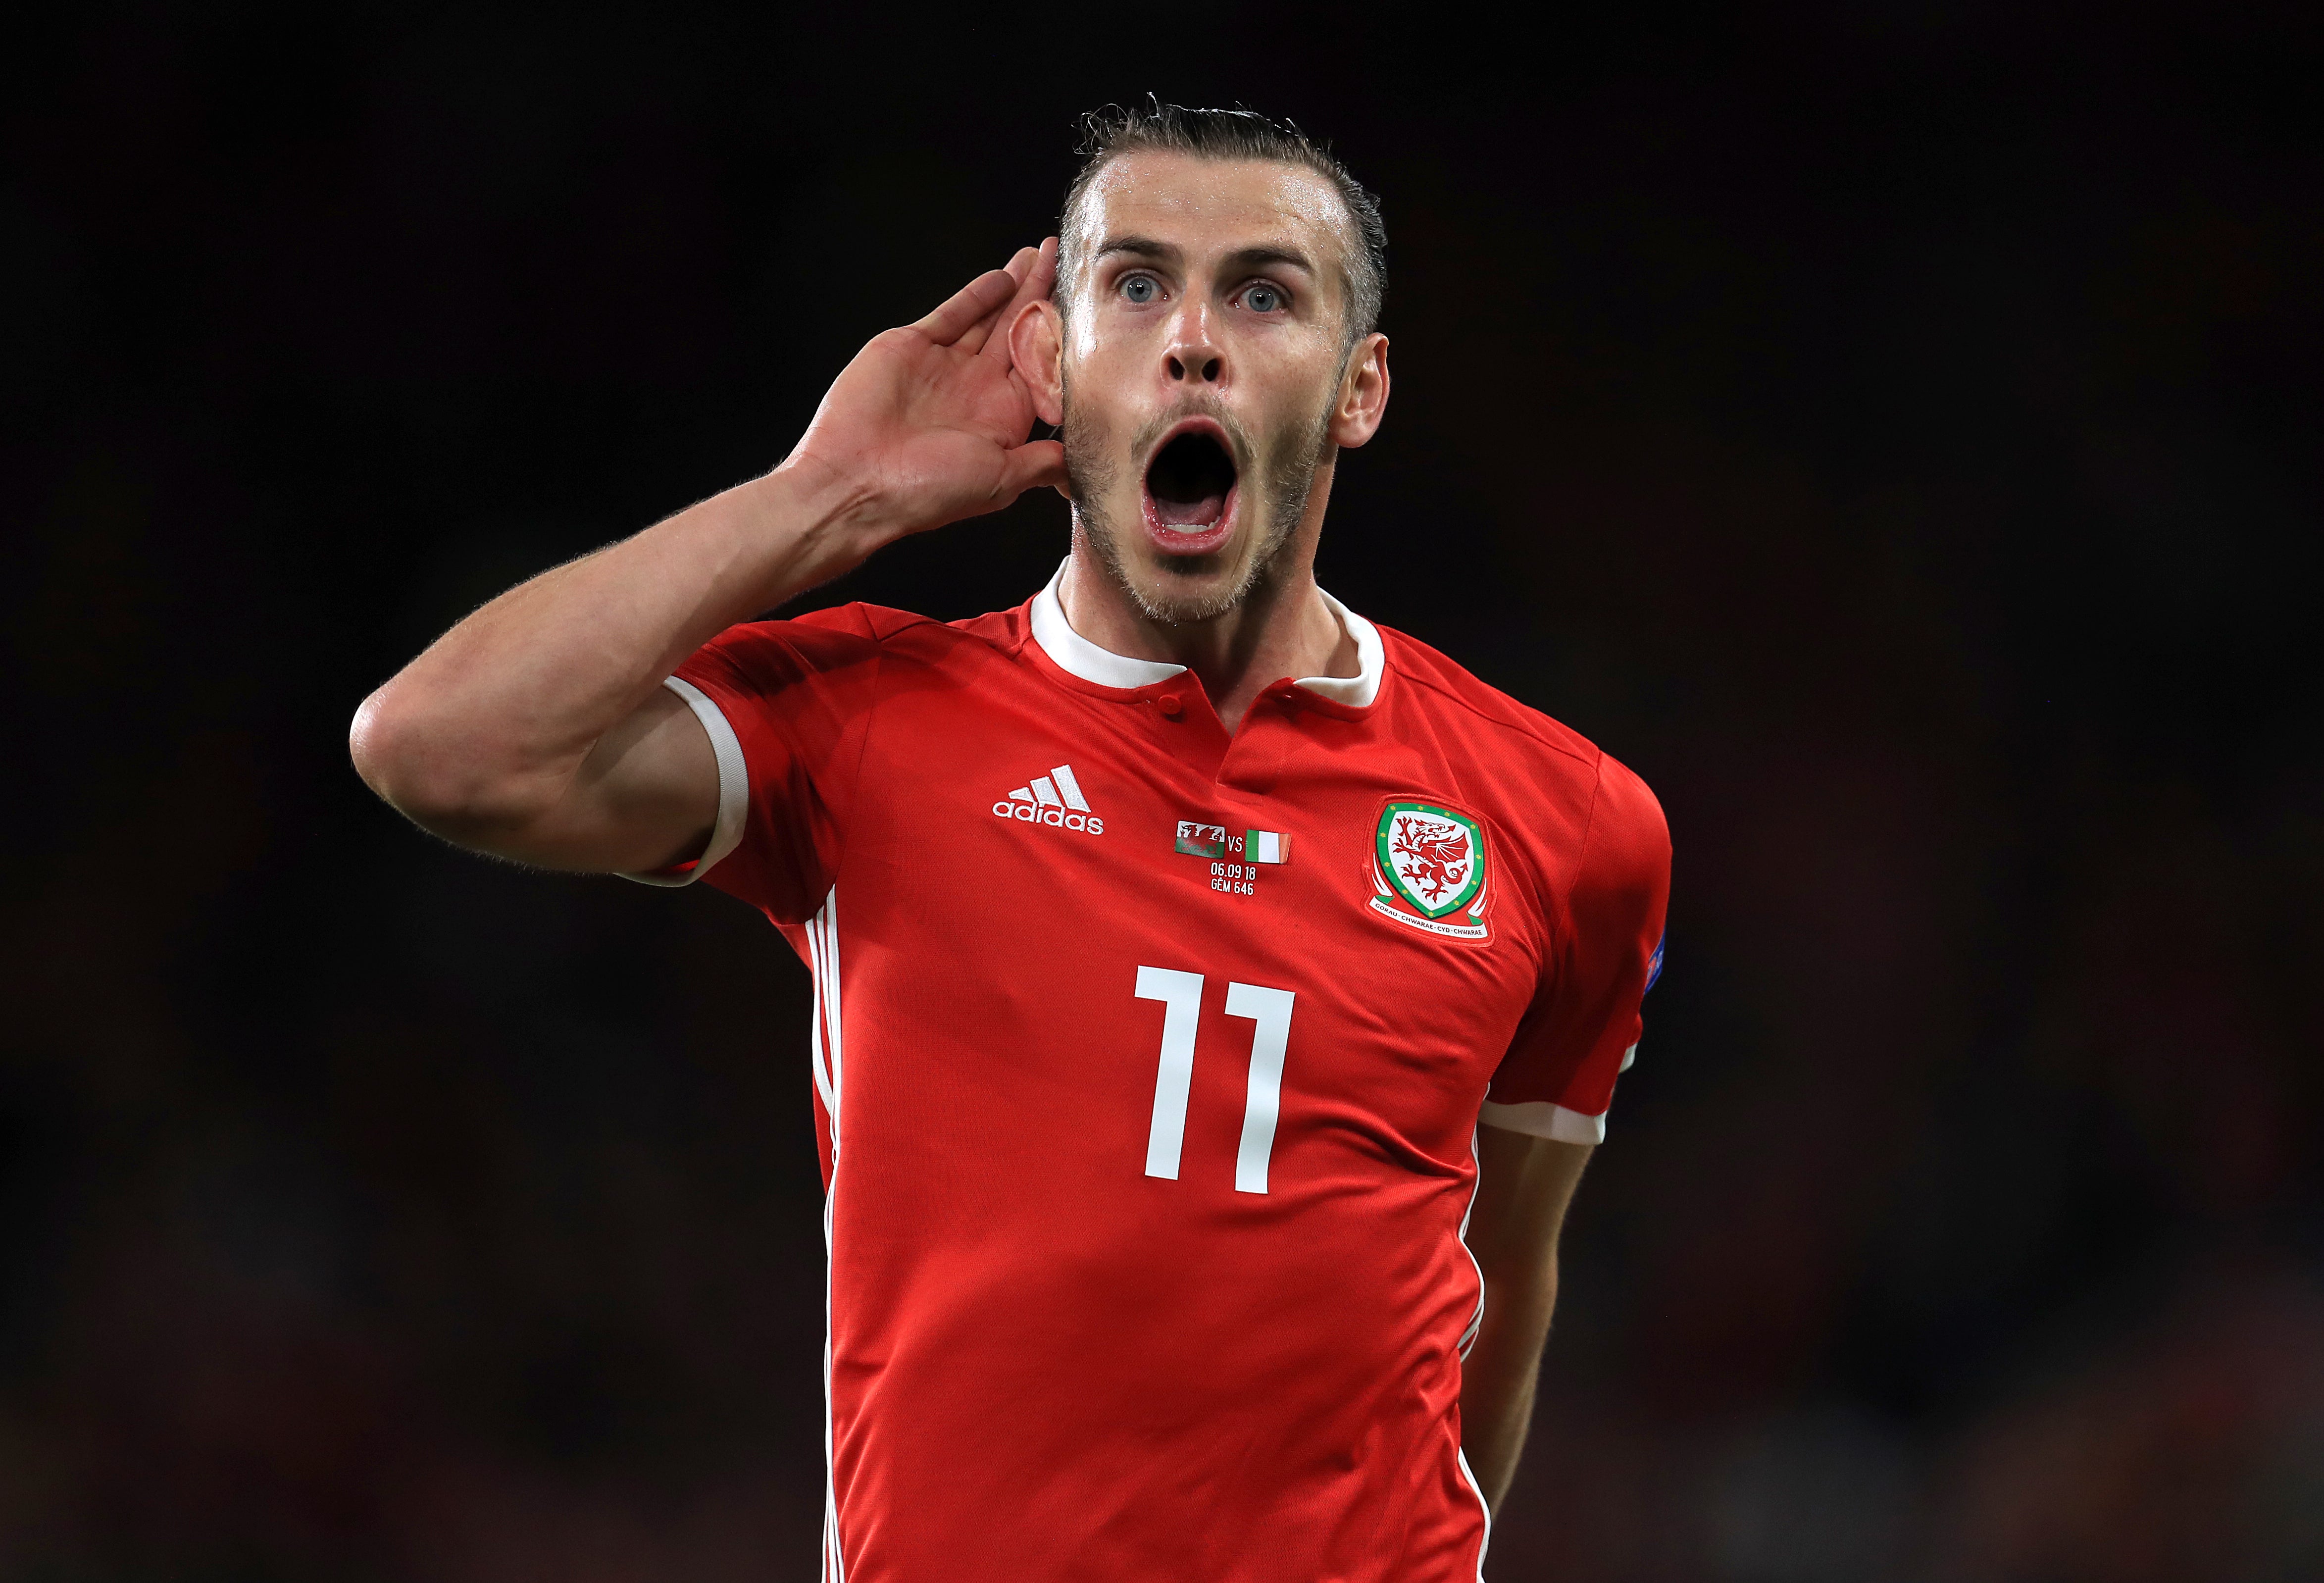 Euro 2012 qualifiers: Gareth Bale's Wales will be ready for